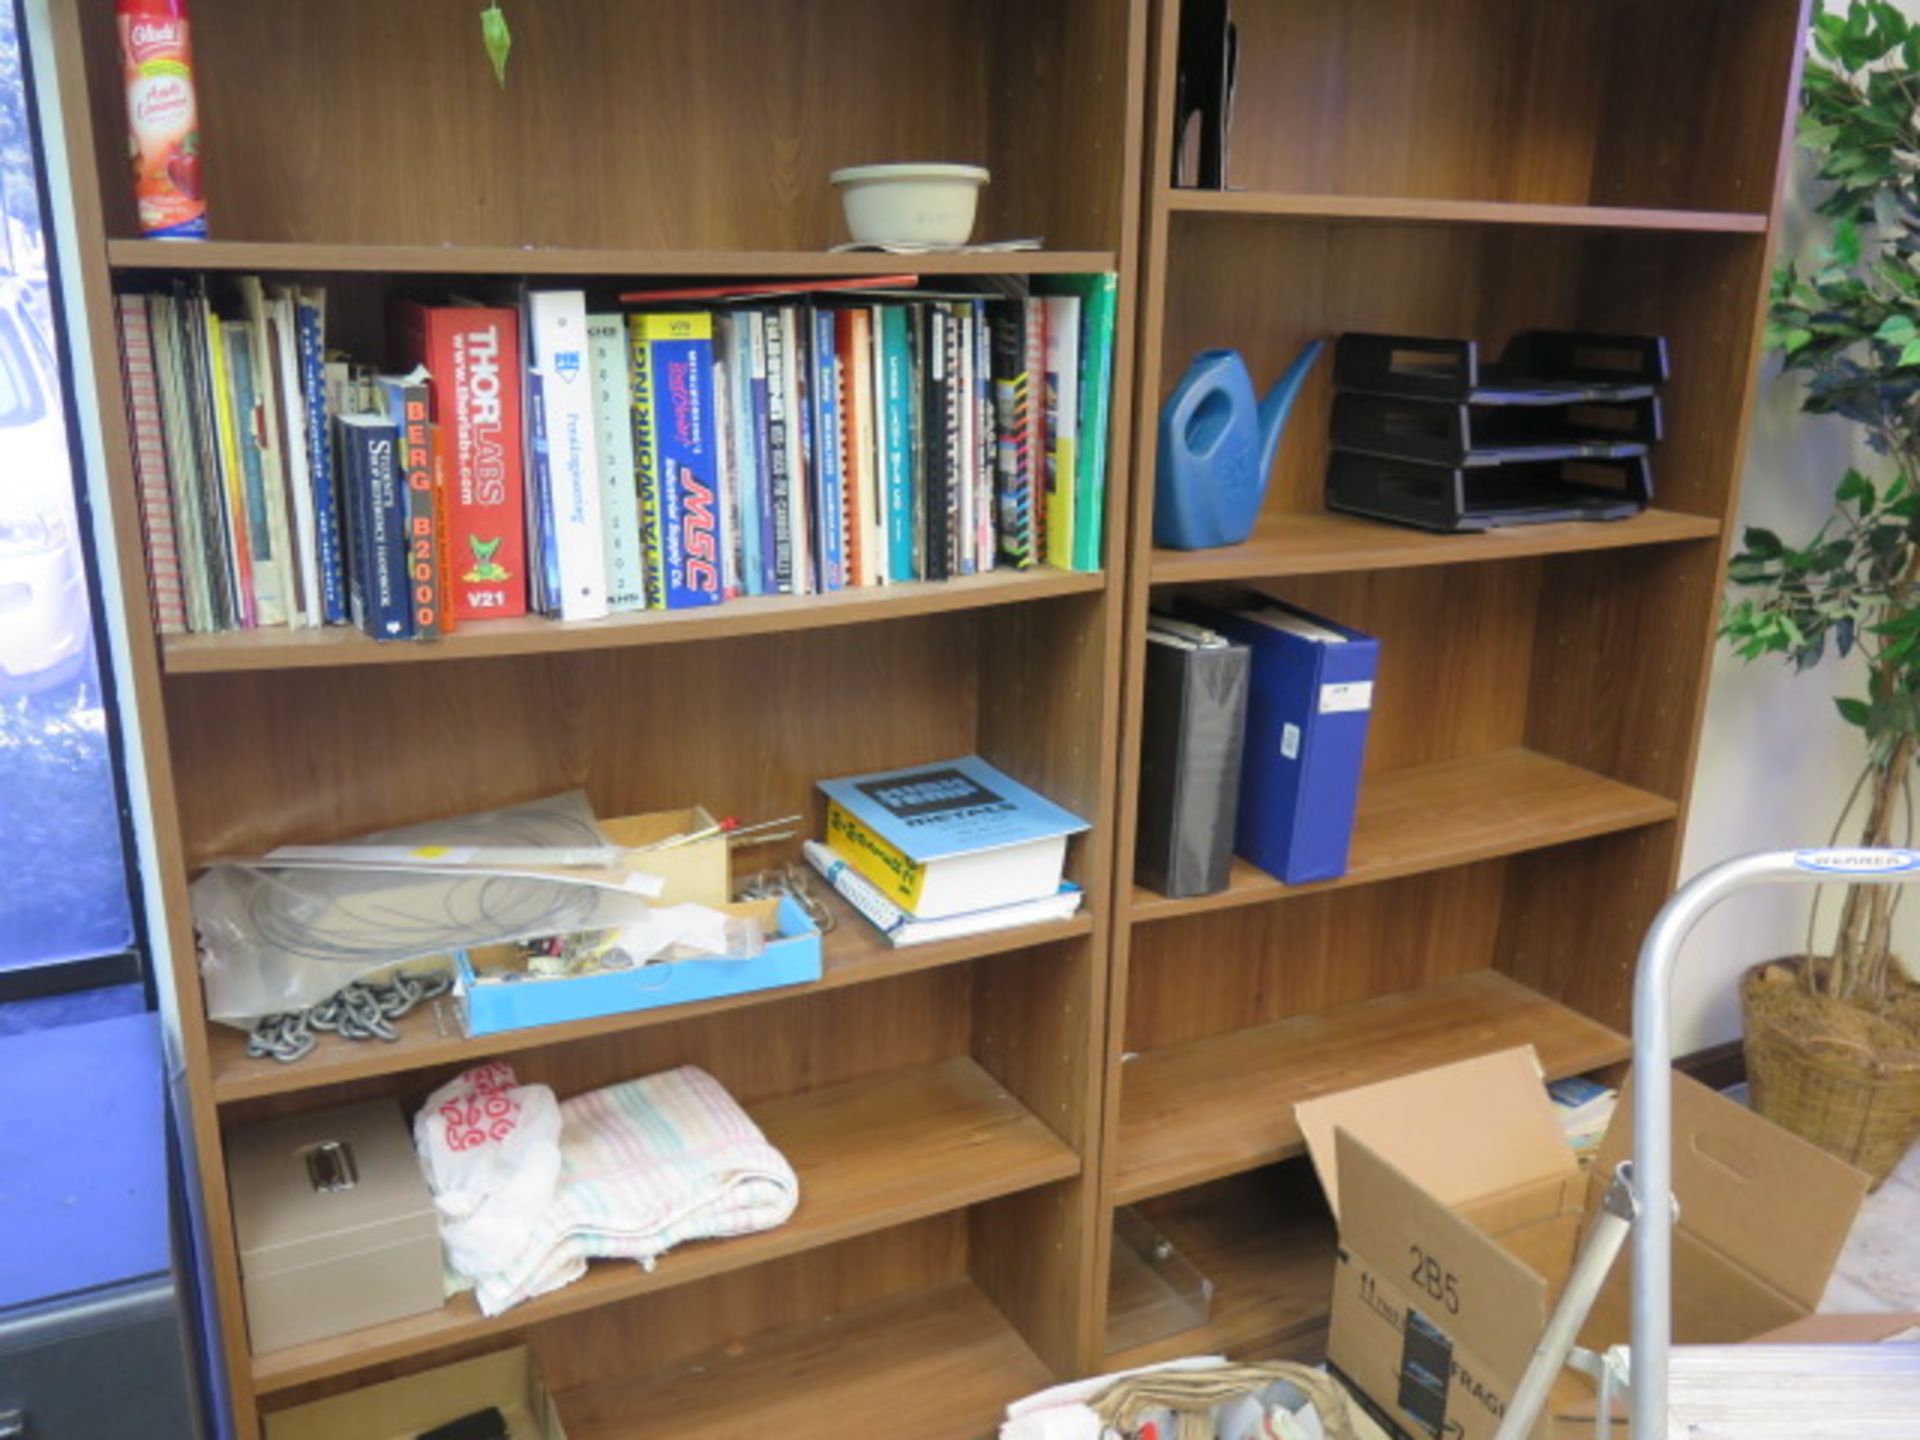 Secretarys Desk, Book Shelves, Tables and Chairs - Image 3 of 6